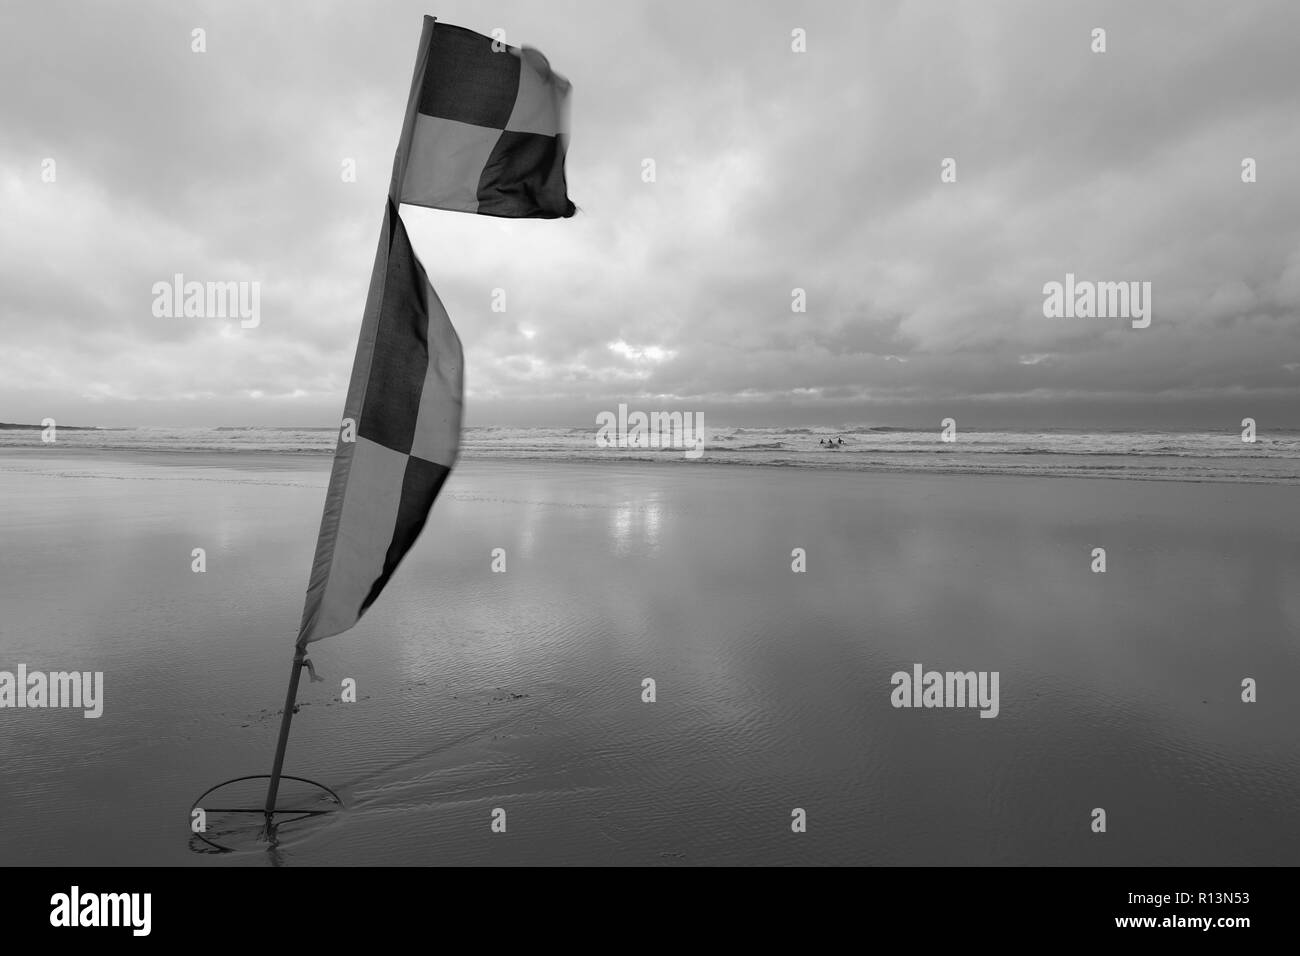 Croyde Bay beach North Devon in windy weather showing lifeguard flags in foreground in black and white Stock Photo